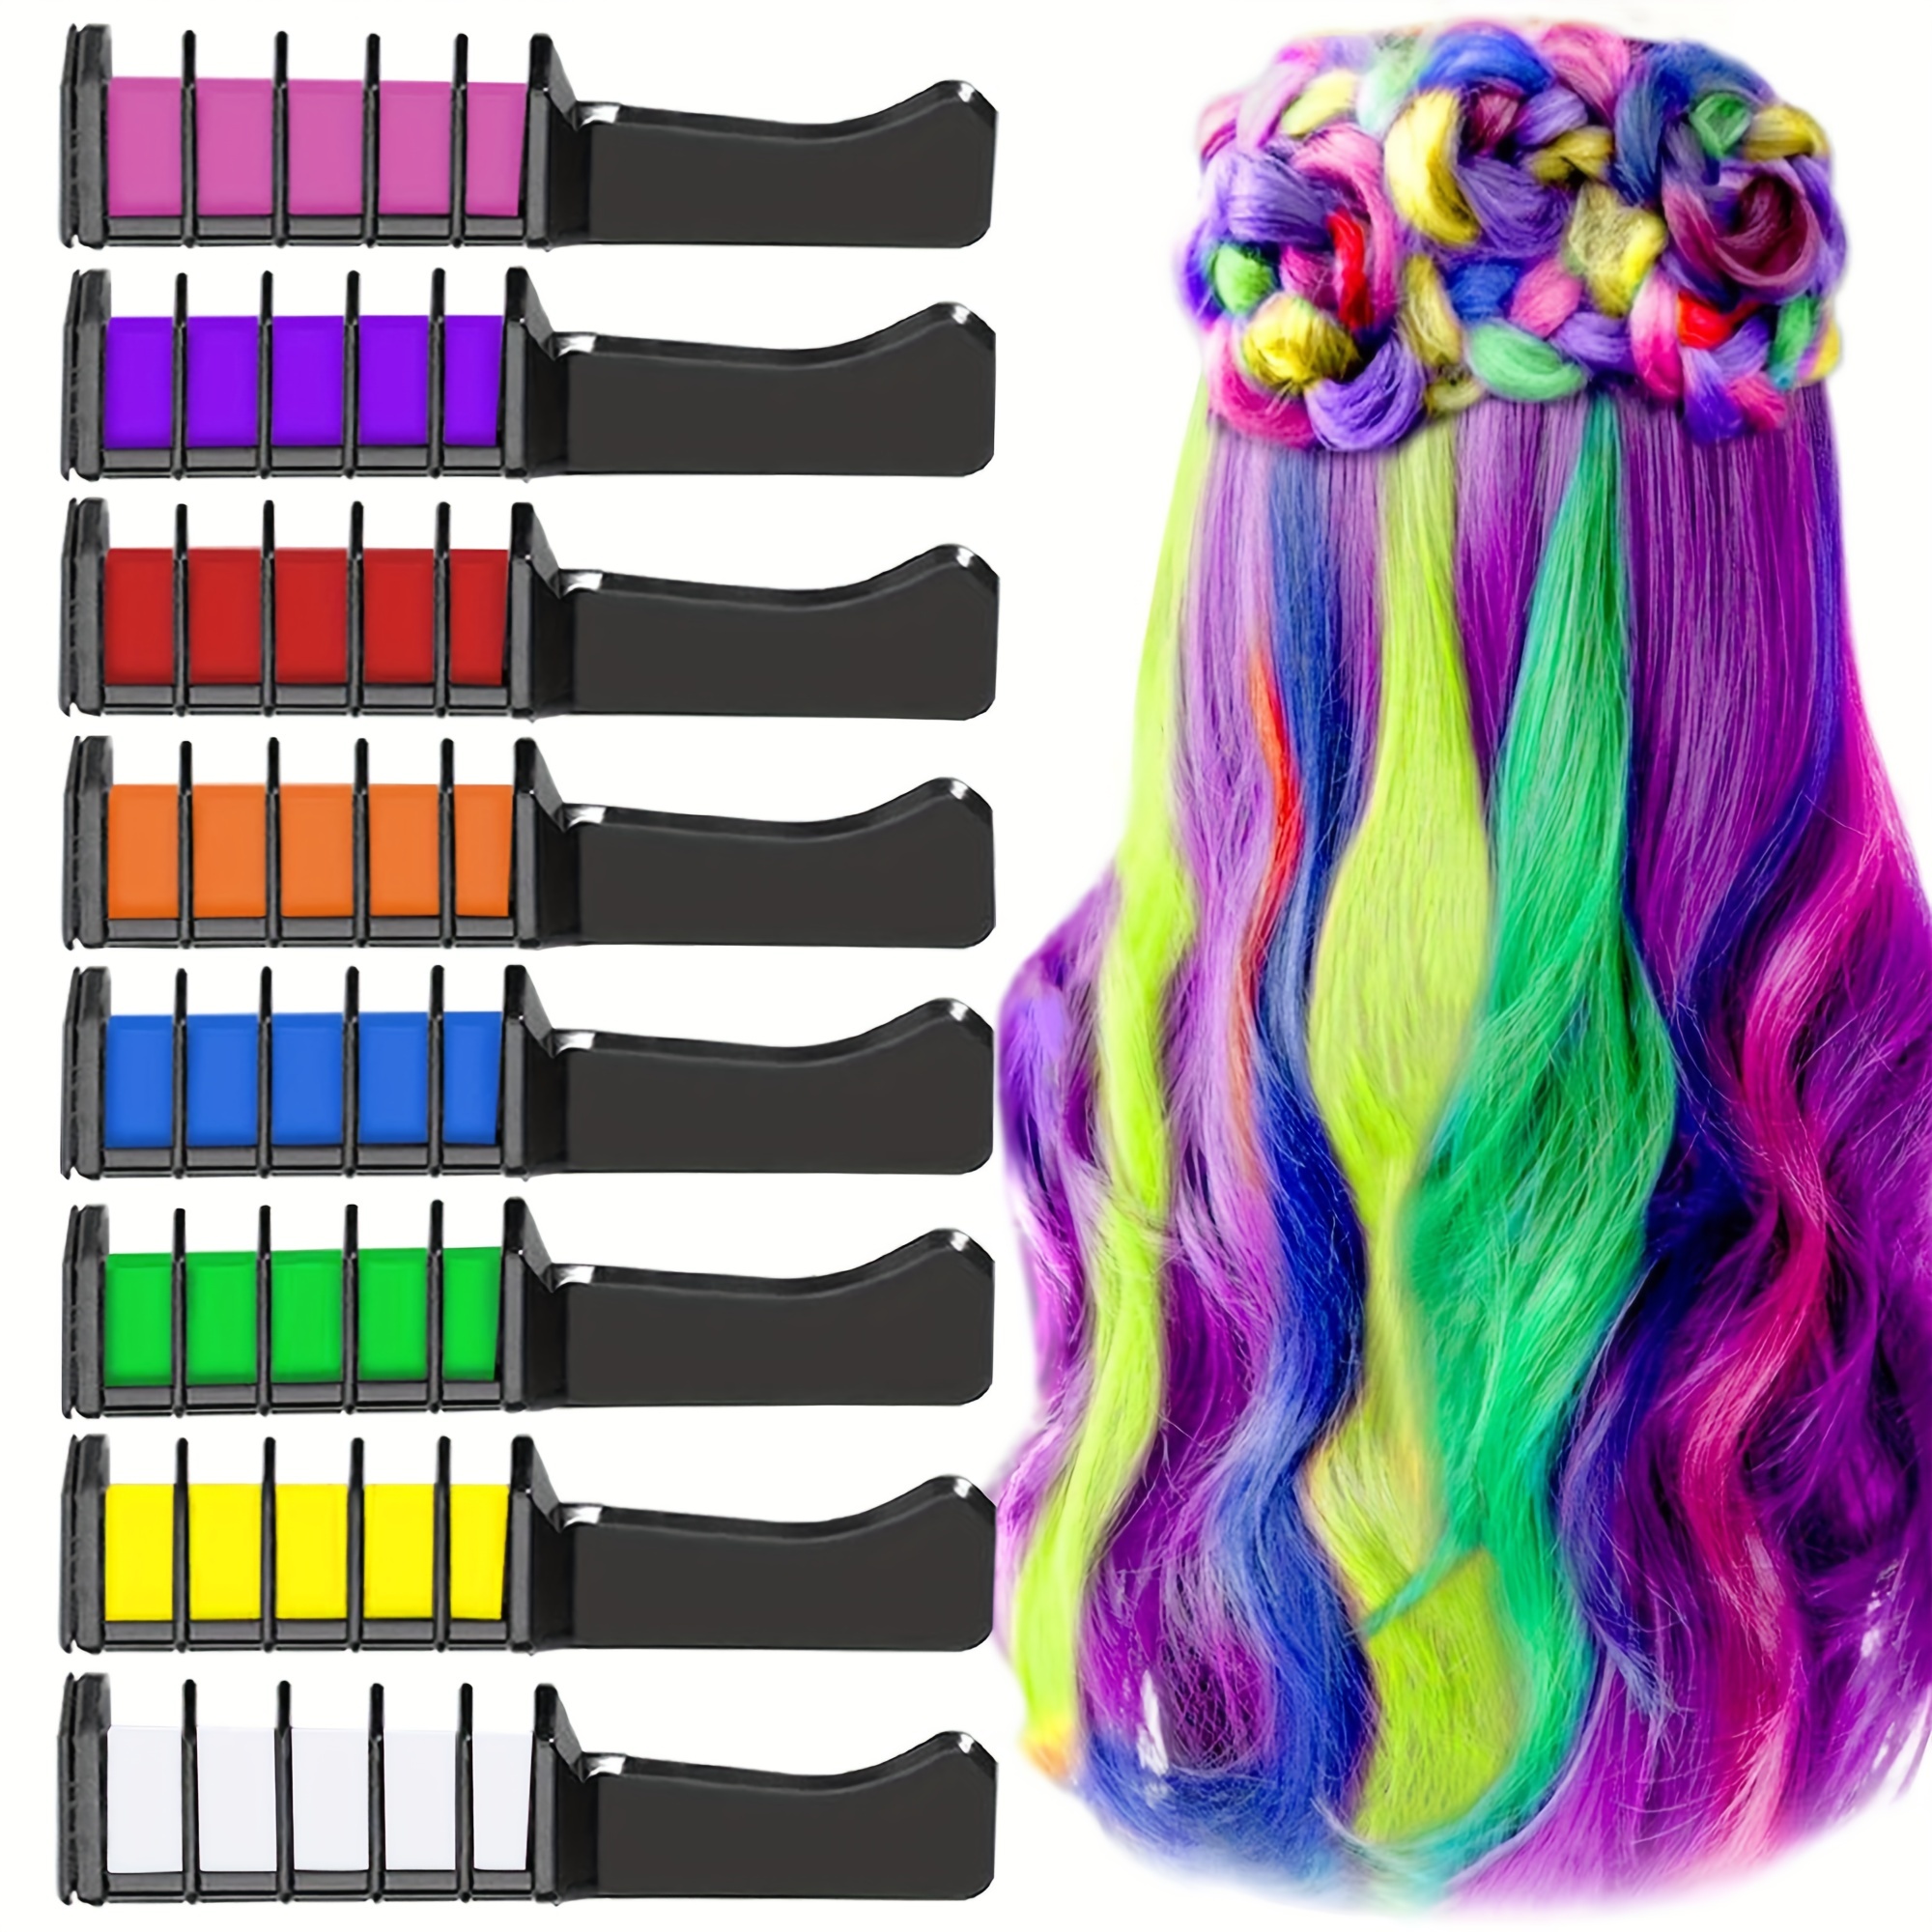 Doctor Li Hair Chalk Comb Temporary Bright Hair Color Dye for Girls Kids, Washable Hair Chalk for Kids-girls Toys Birthday Halloween Christmas Gifts